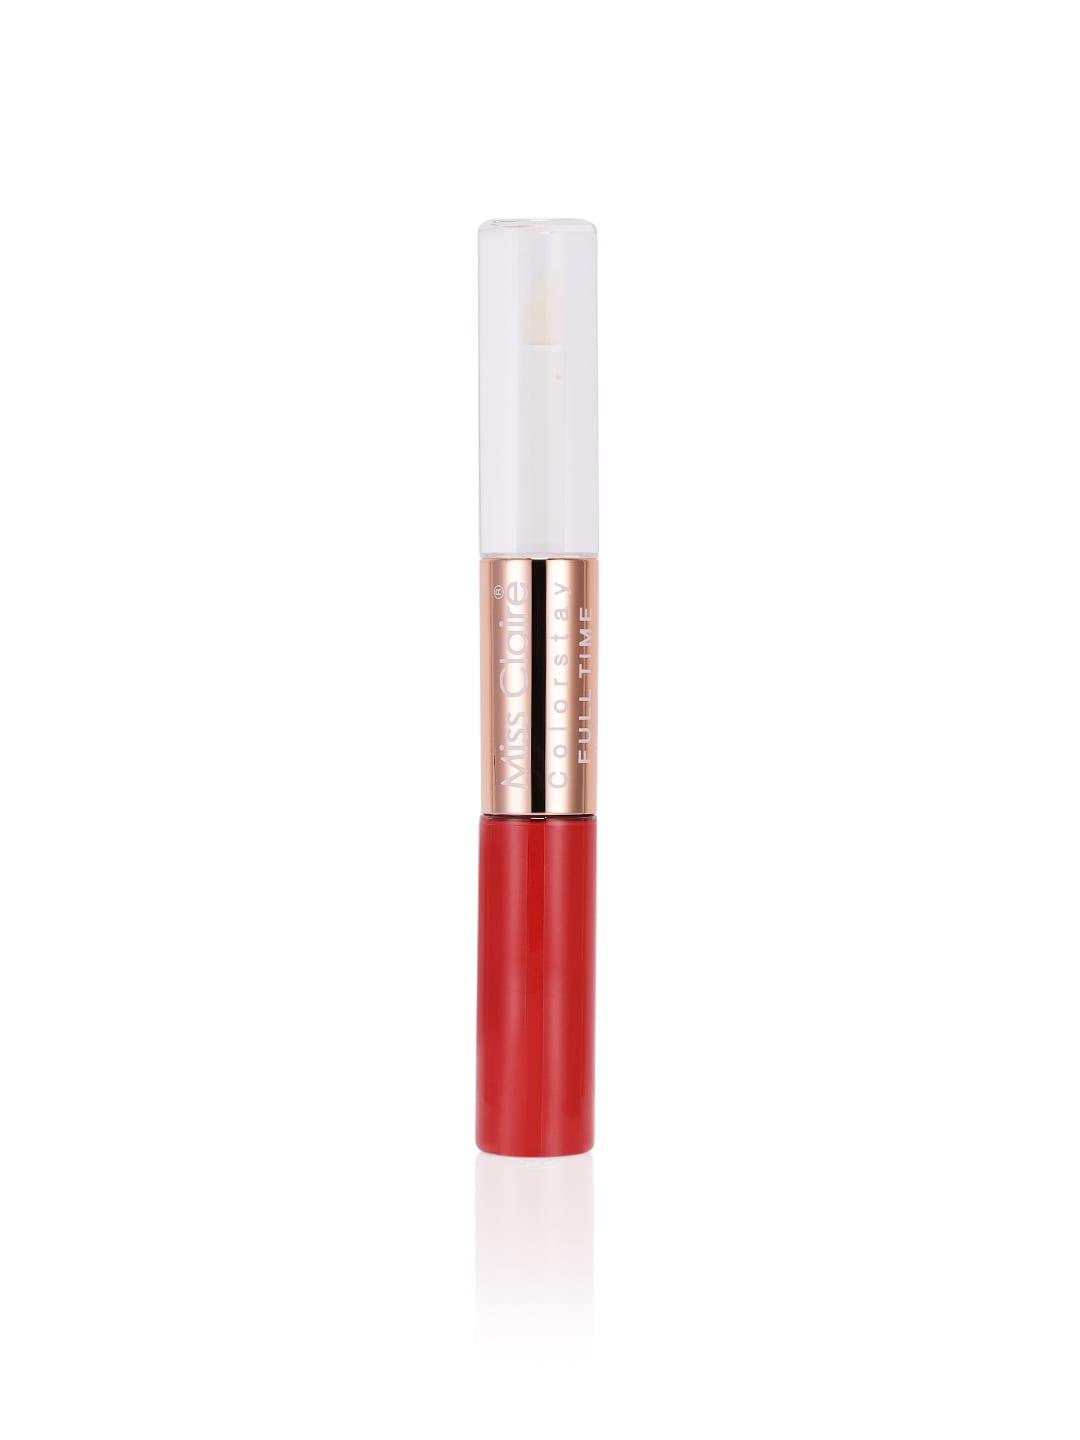 miss-claire-26-colorstay-full-time-lipcolor-10-ml